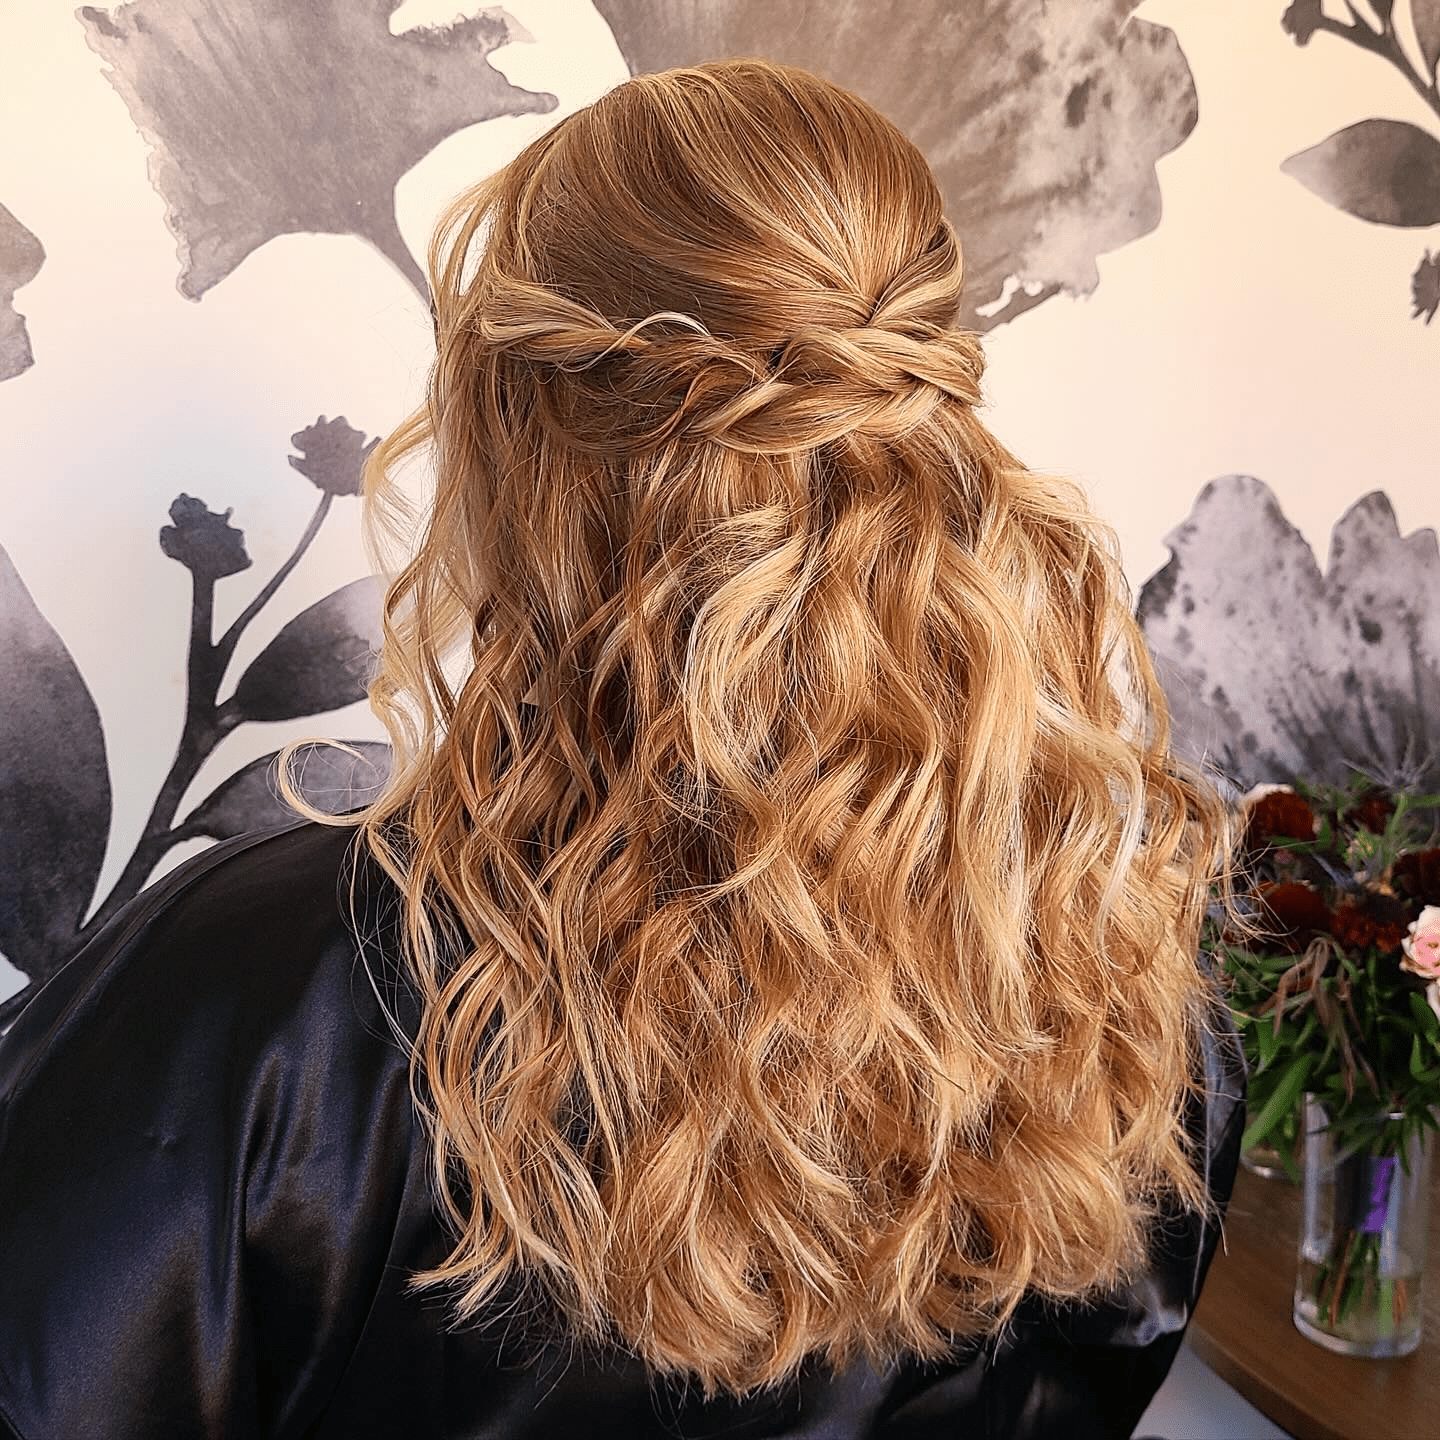 Golden Curls for Prom Night